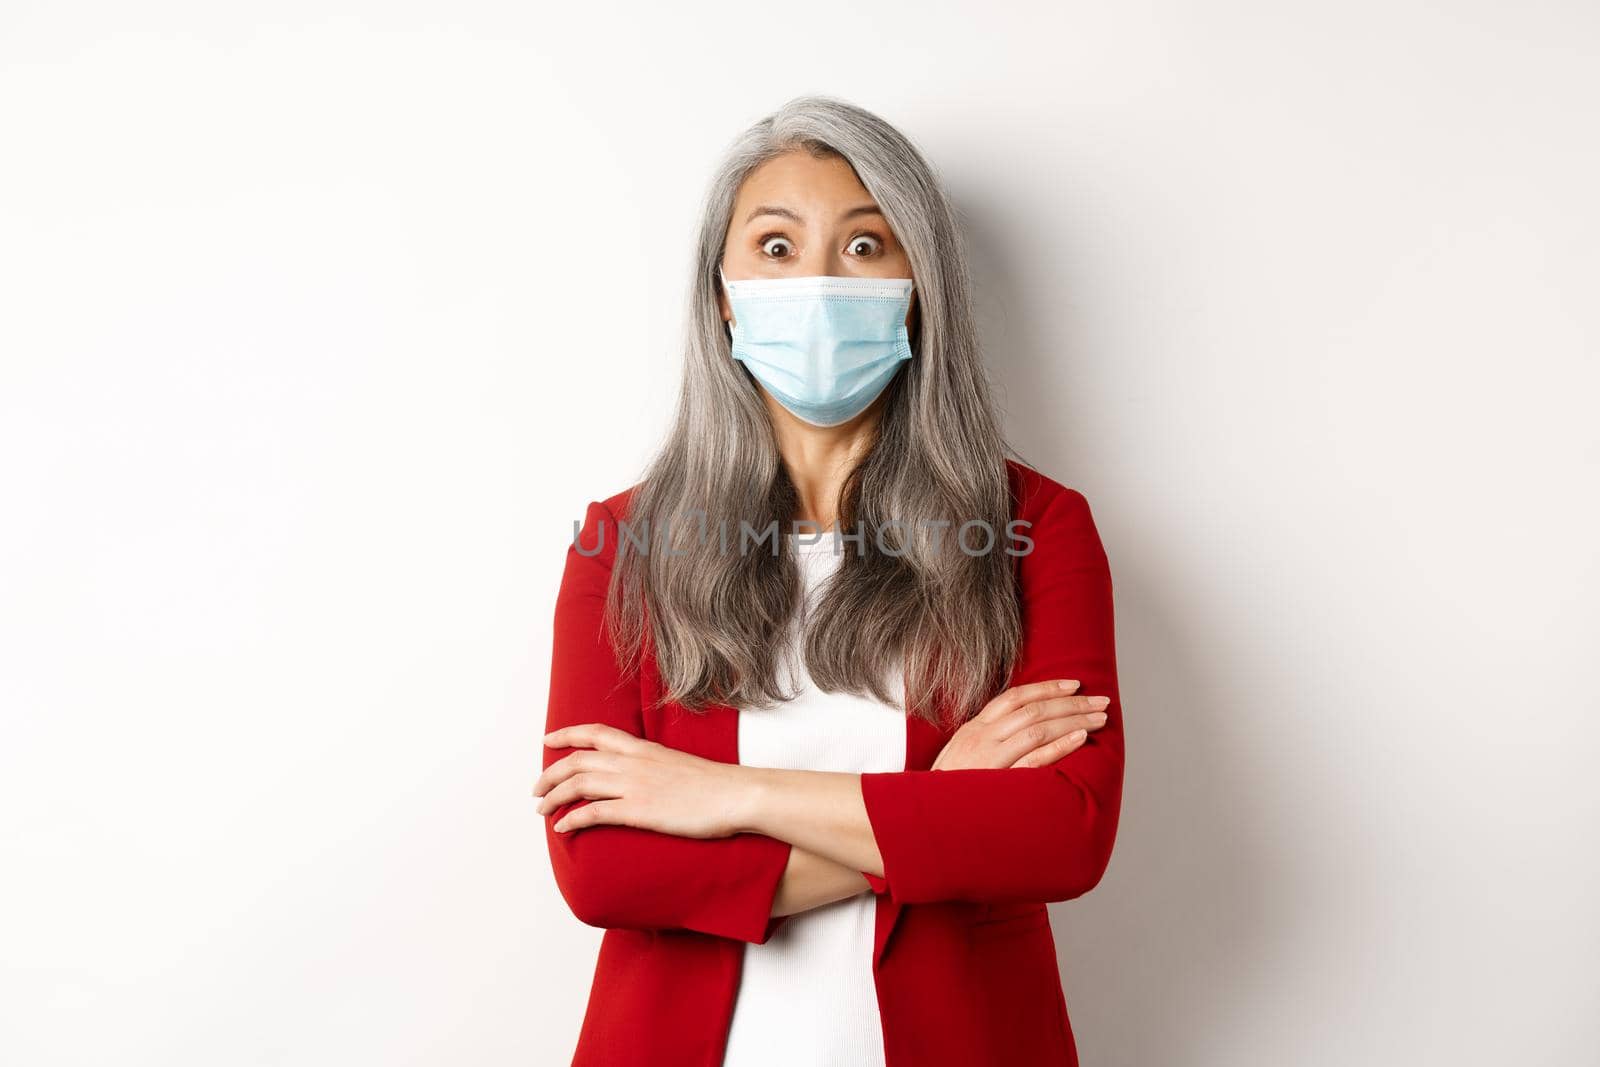 Covid-19 and business people concept. Asian businesswoman in face mask looking surprised, staring at camera in awe, standing over white background.